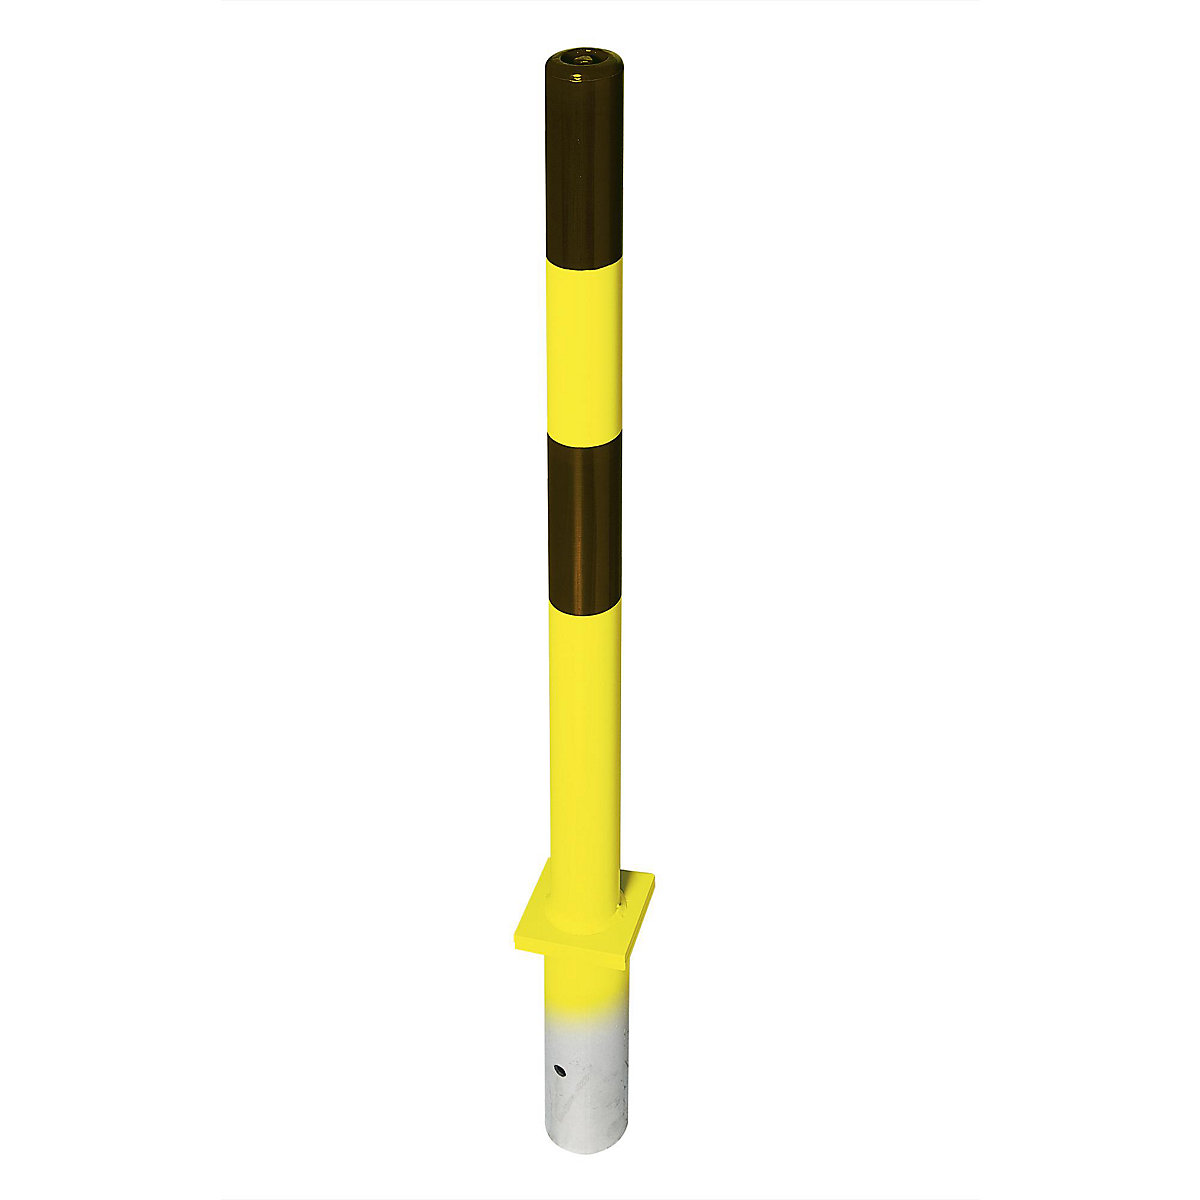 Barrier post made of steel, for setting in concrete, Ø 60 mm, black/yellow, 1 chain eyelet-5